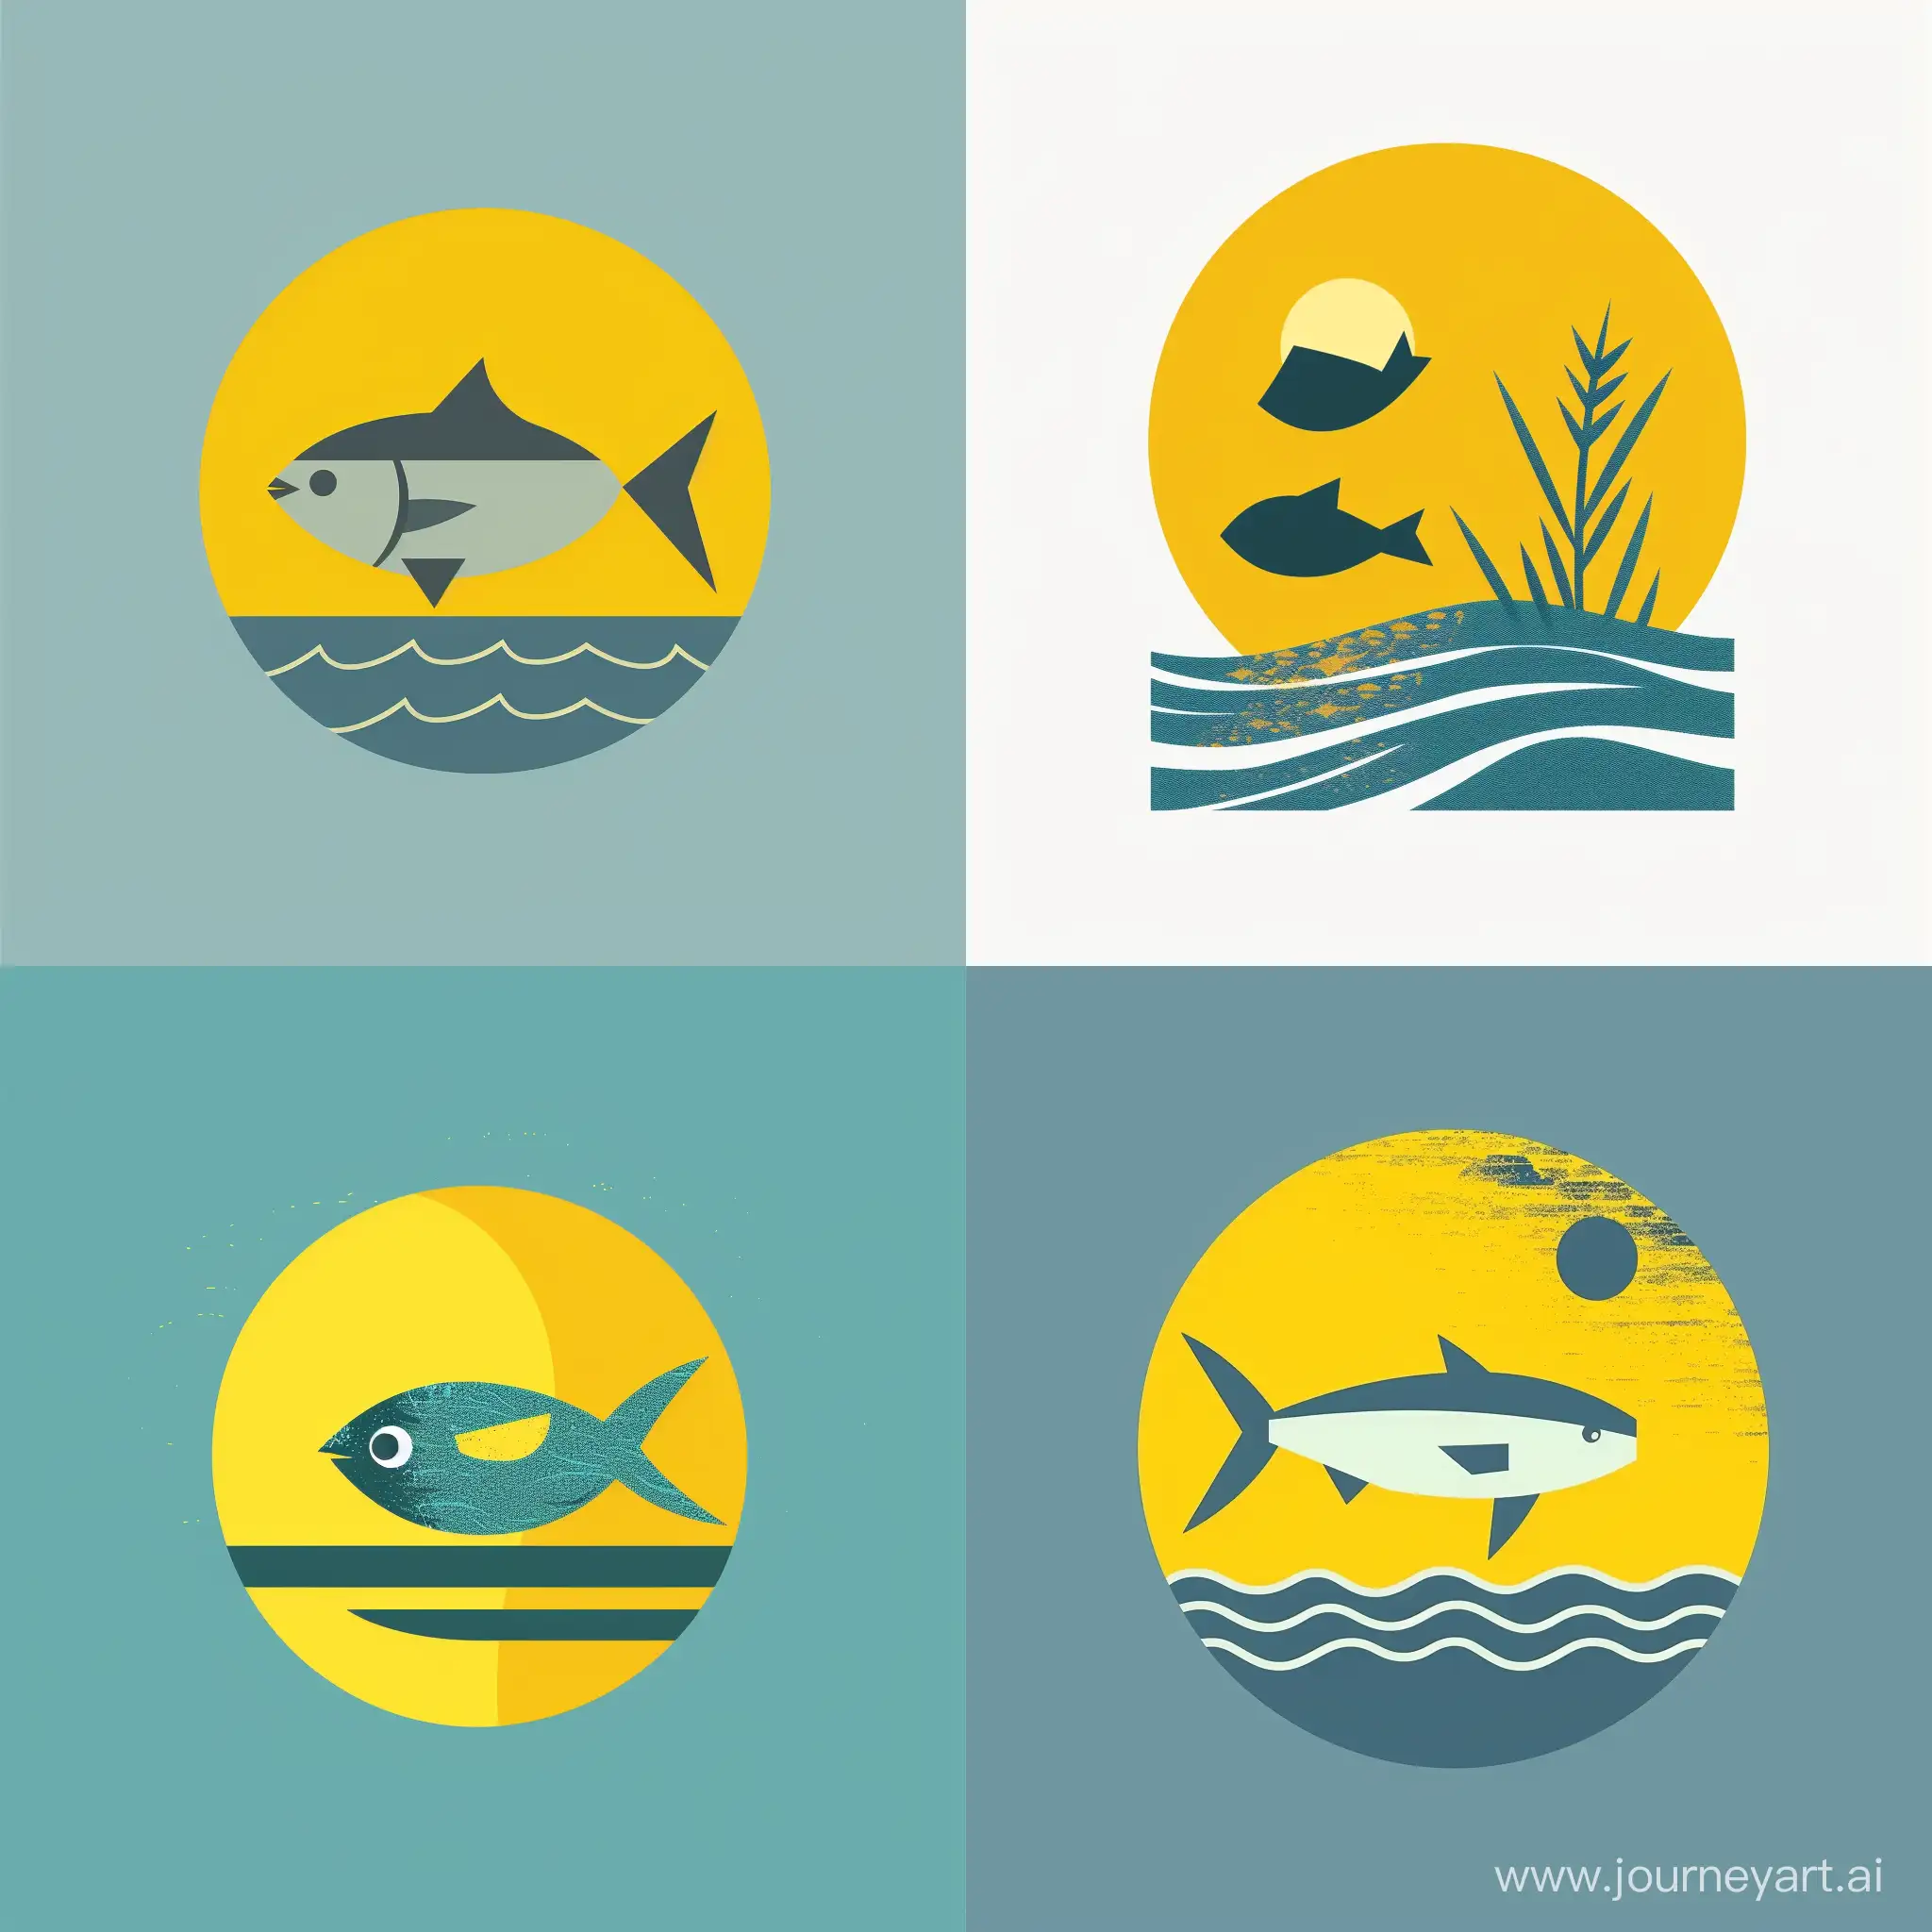 Flat-Style-Aquatic-Animal-Cultivation-Logo-with-Yellow-Sun-and-Grain-Texture